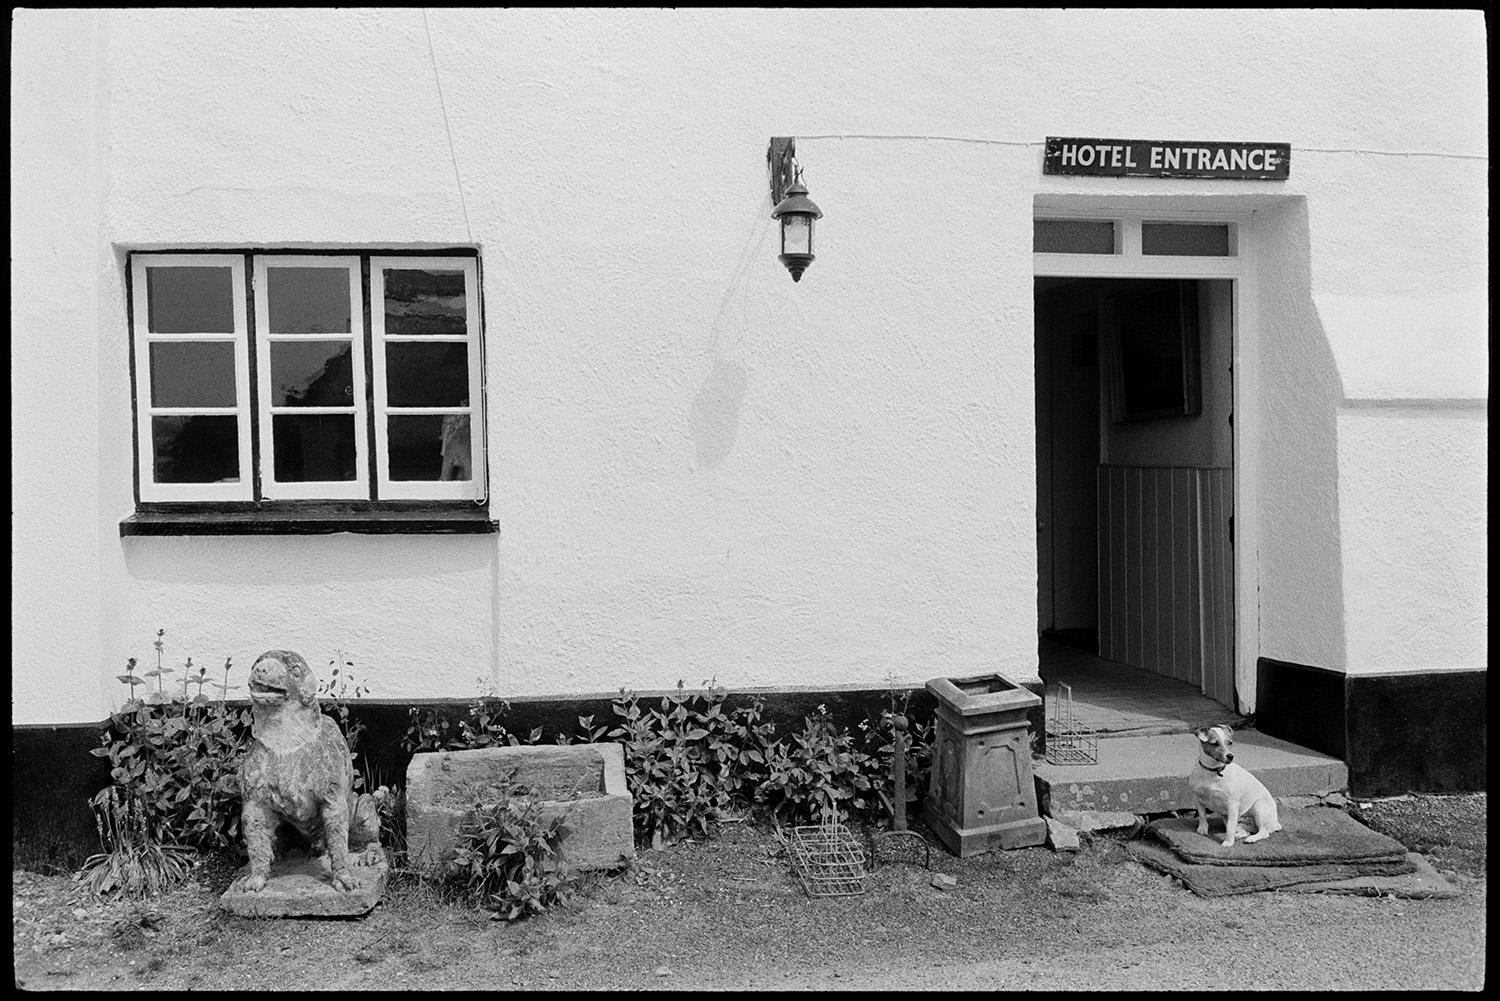 A dog sitting on a mat on the doorstep of the Duke of York, Iddesleigh. A stone trough, a stone ornament and milk bottle holders are also outside the front of the pub.